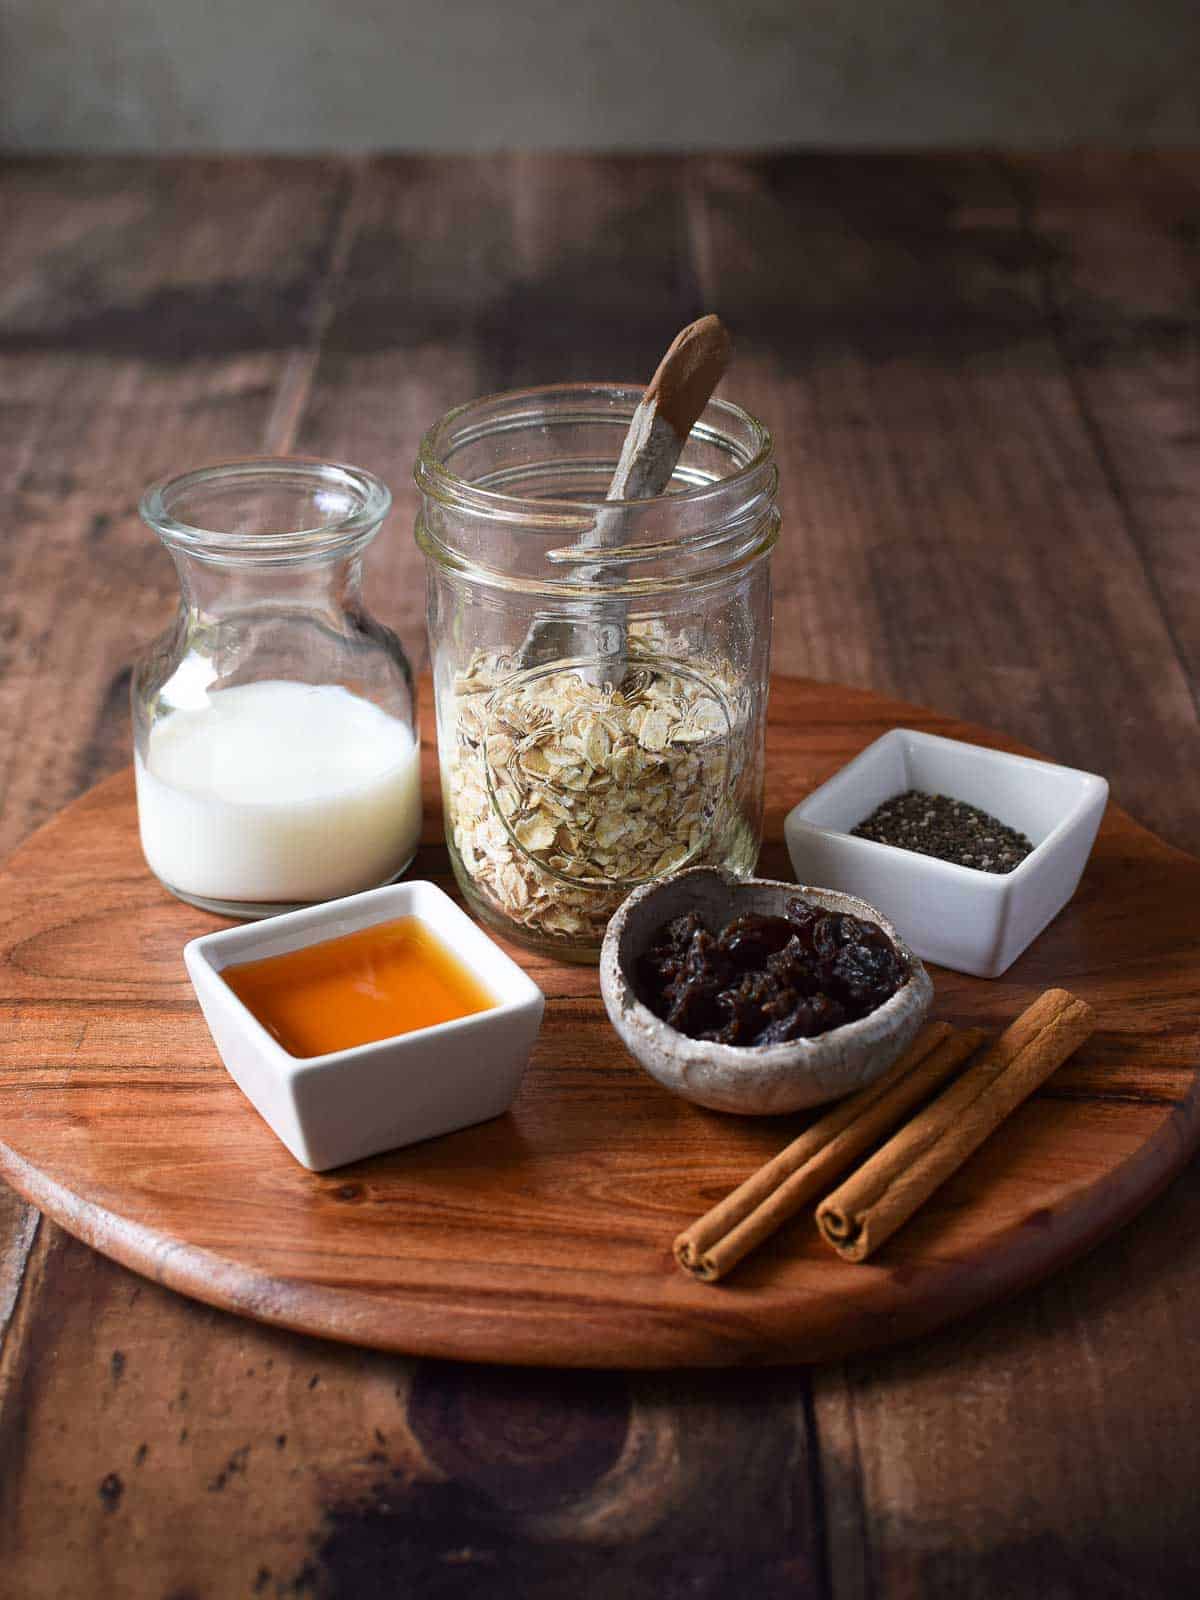 Ingredients for overnight oats on a wooden serving board.